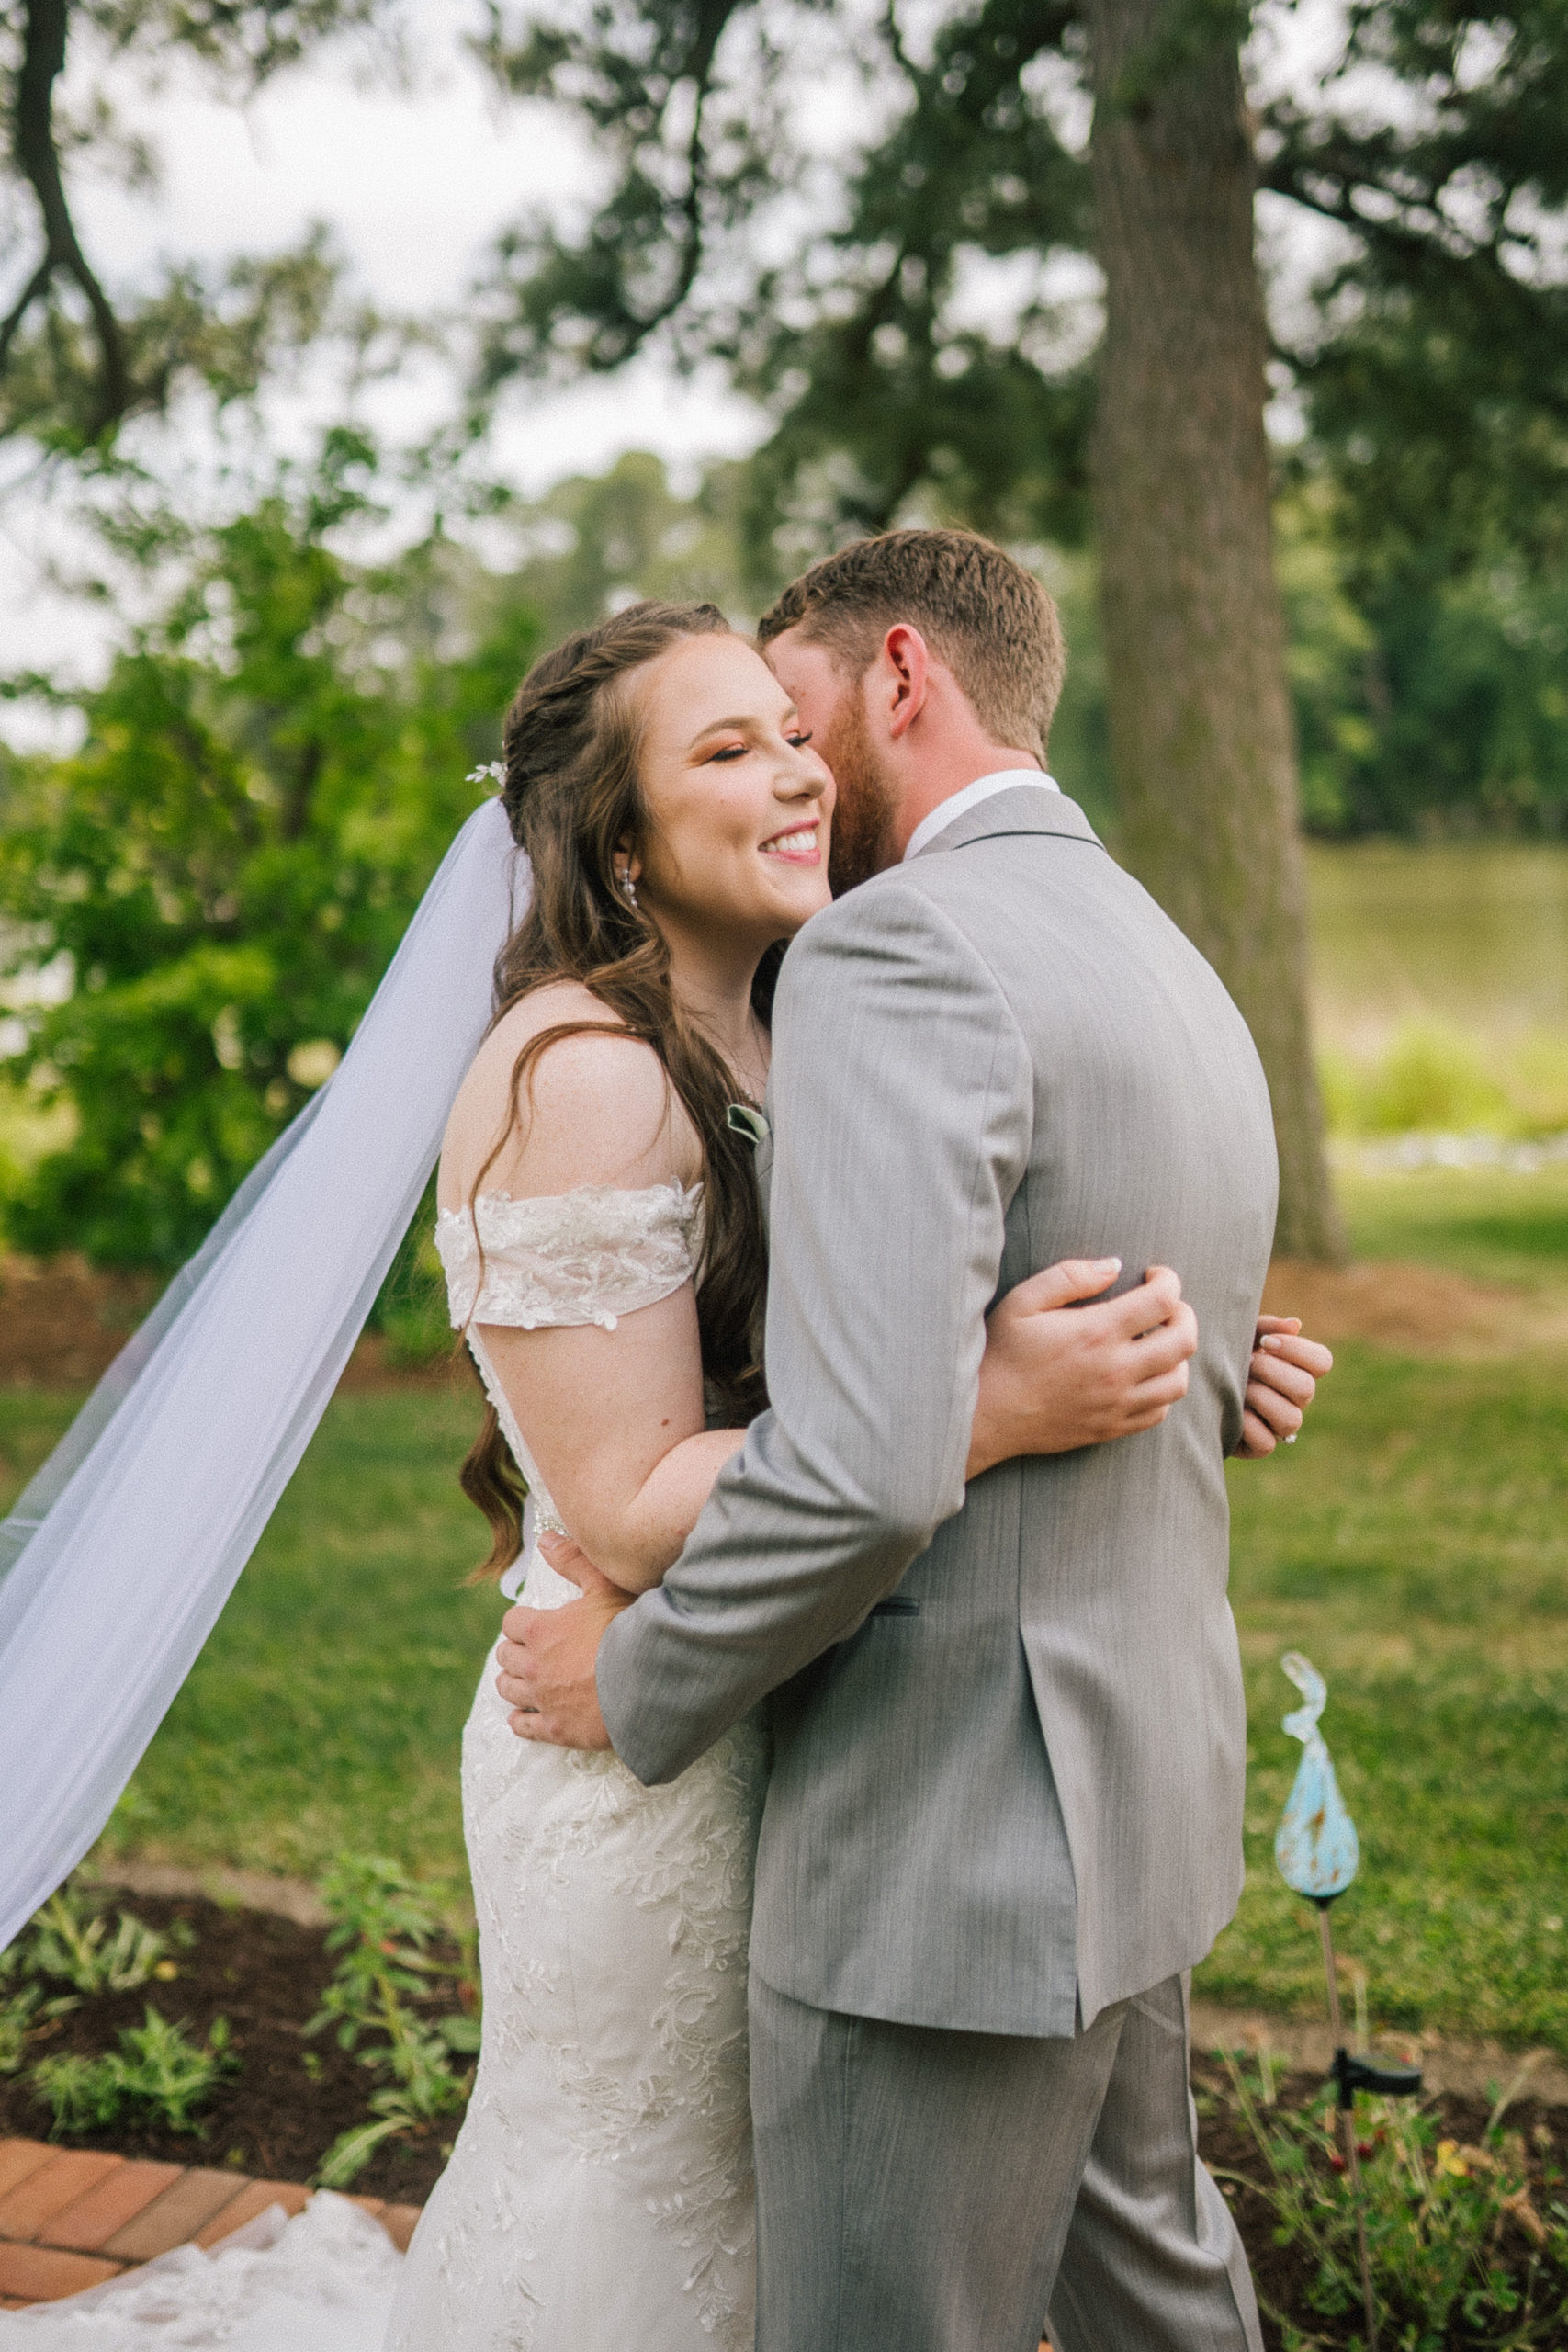 Maryland bride and groom embrace each other and their water front wedding venue as the bride smiles while her veil flows behind her in the wind